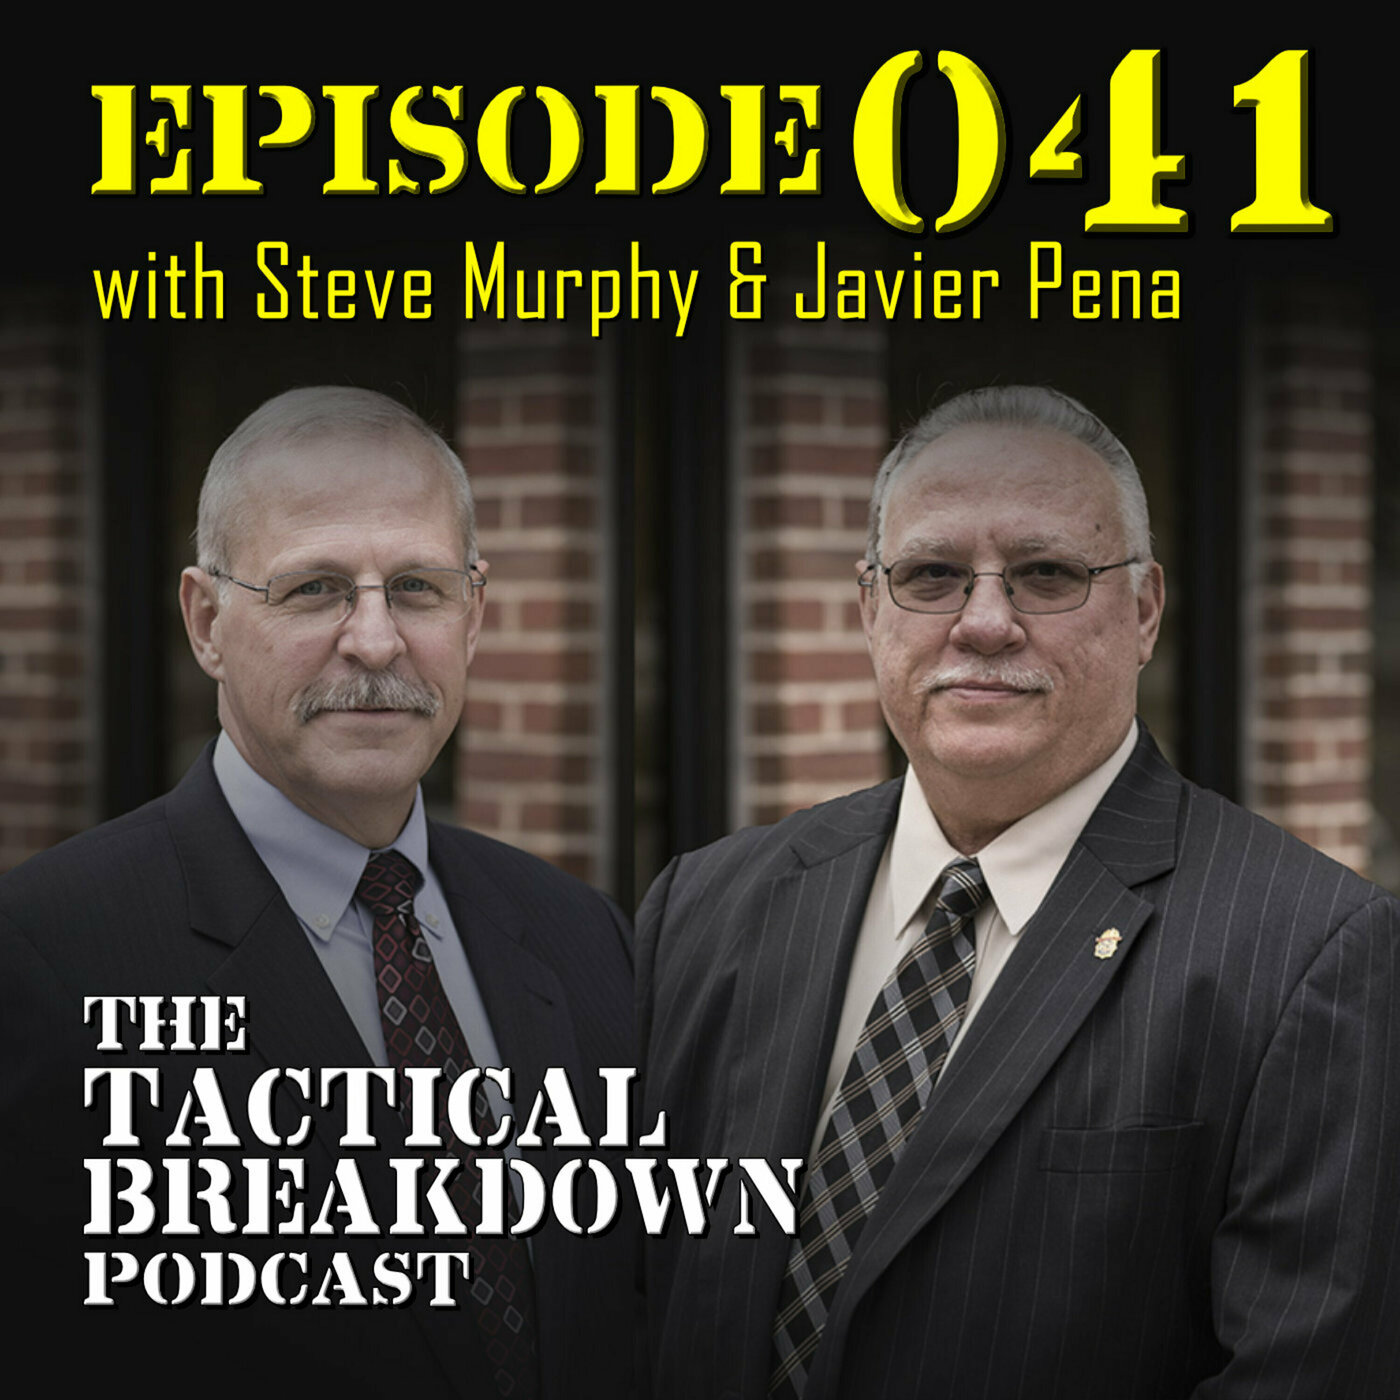 DEA NARCOS - From Cartels to Netflix with Steve Murphy and Javier Pena